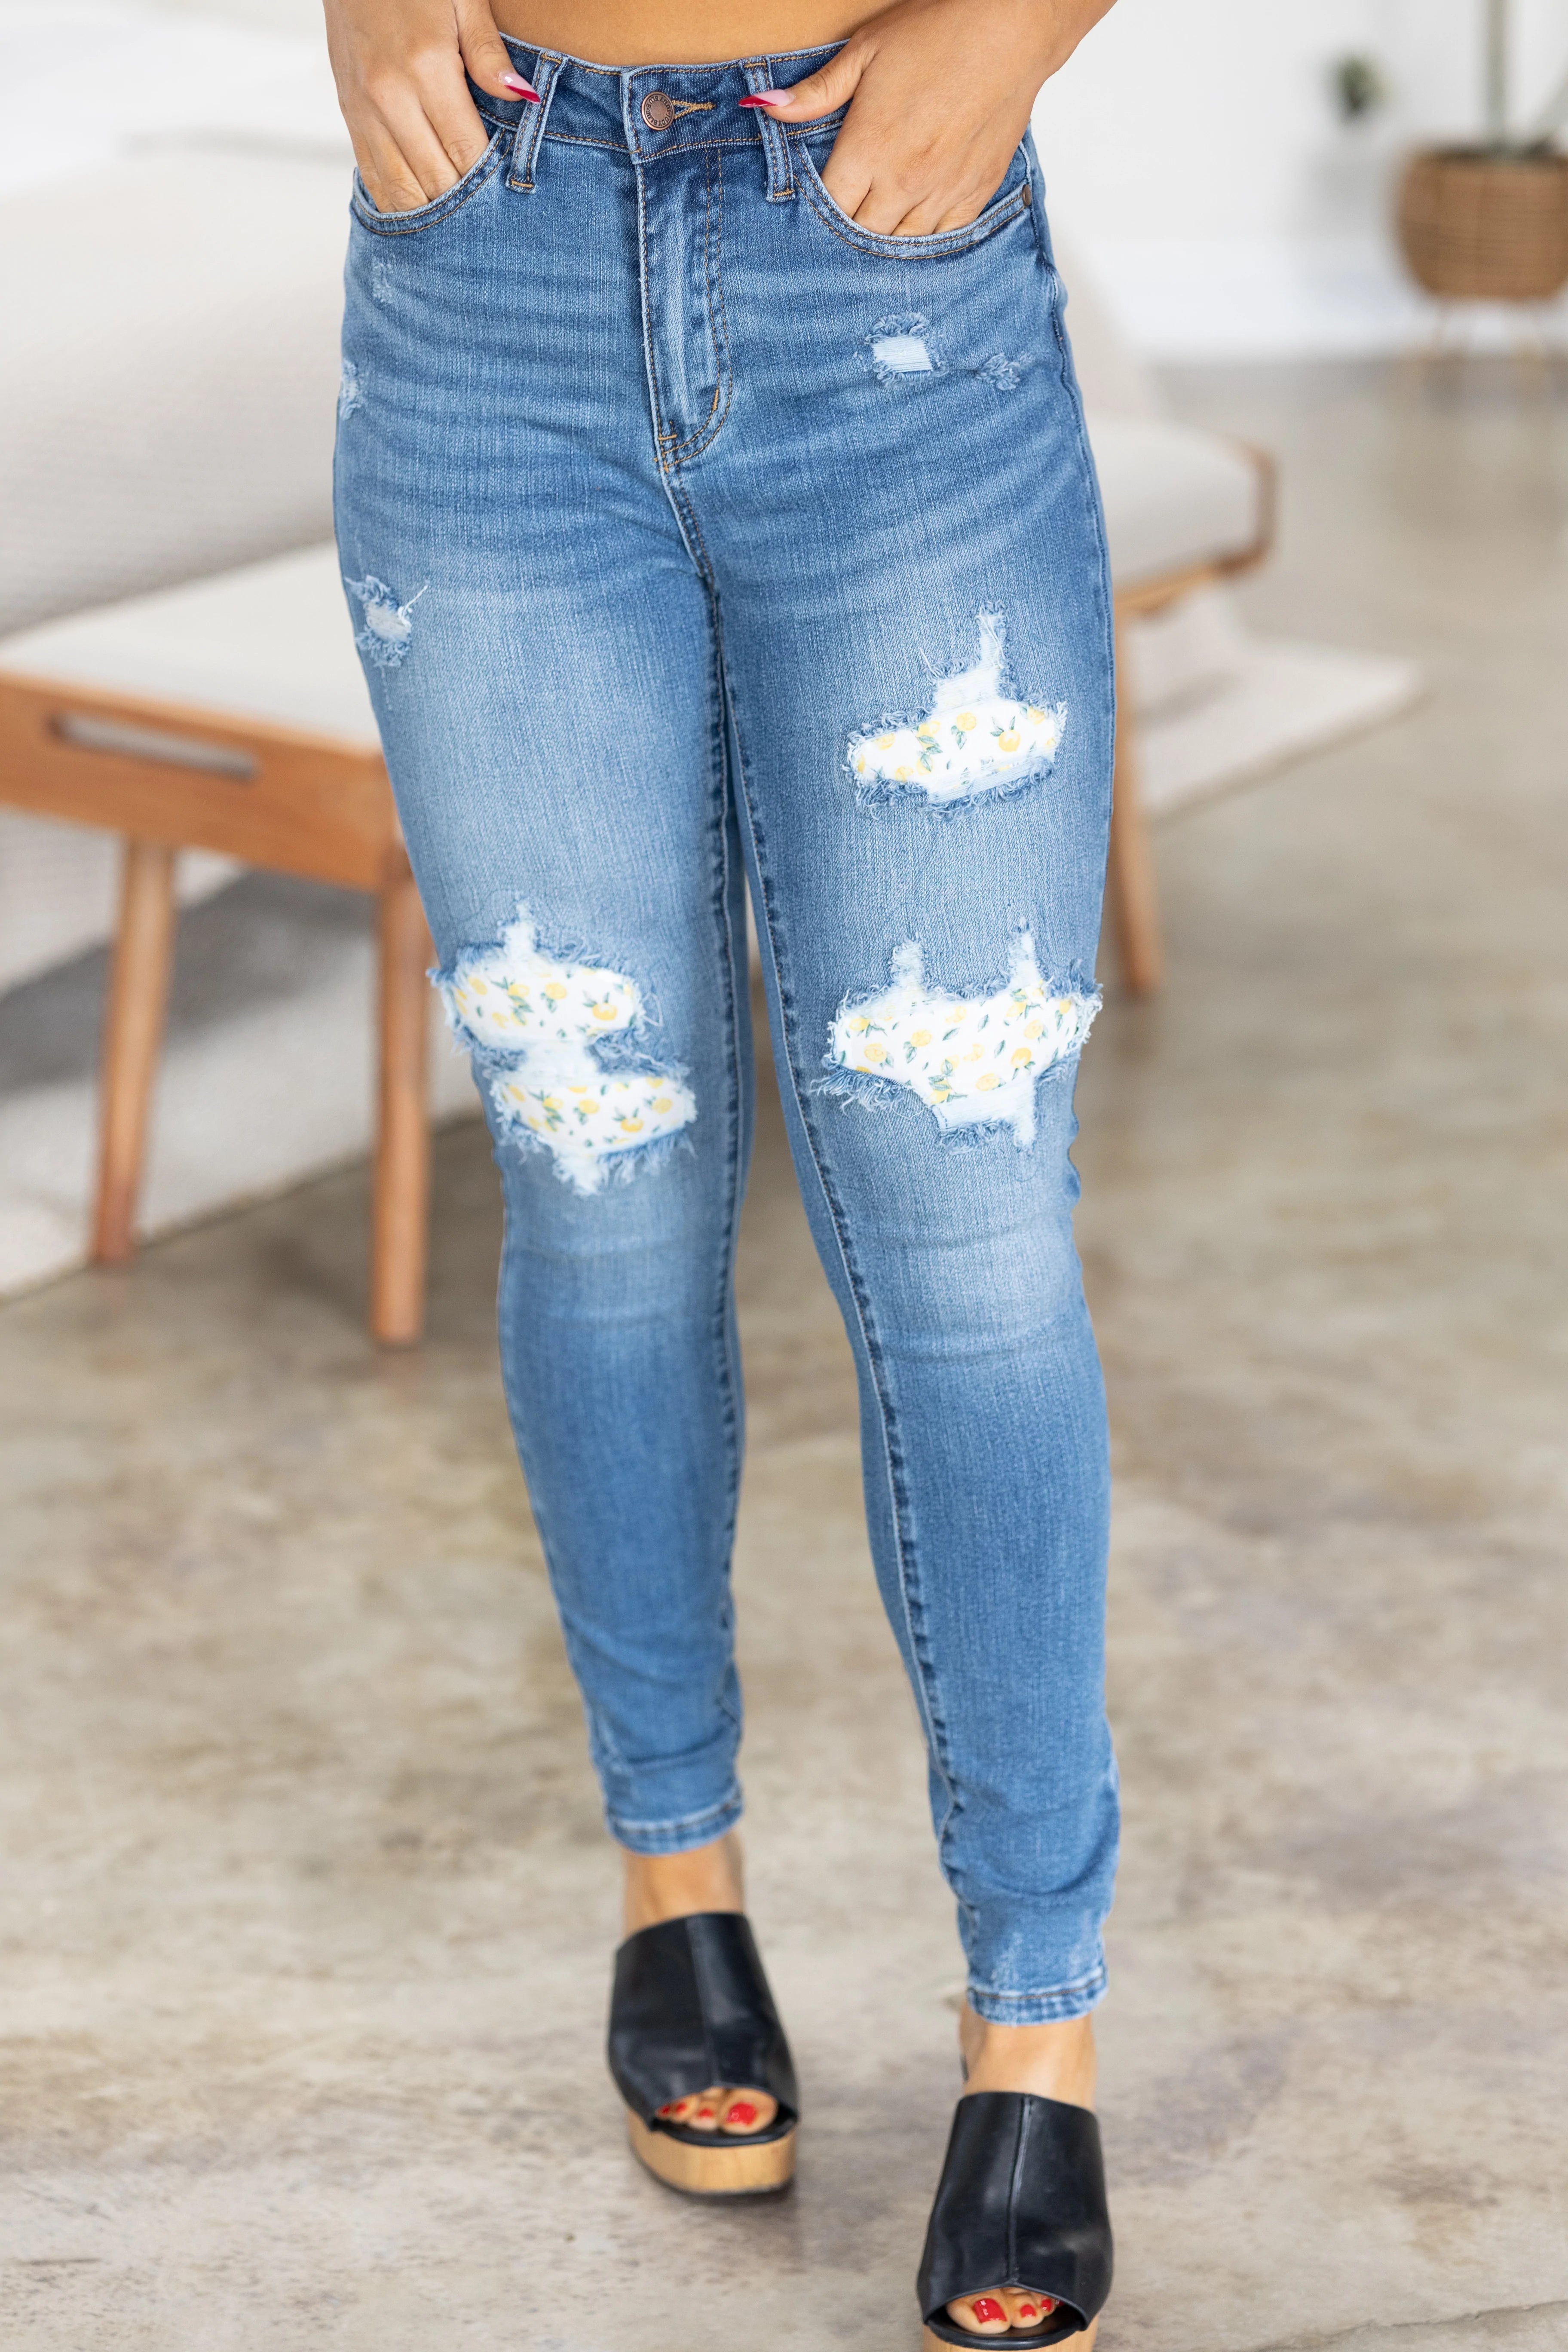 Lemon Drops Judy Blue Patched Skinnies